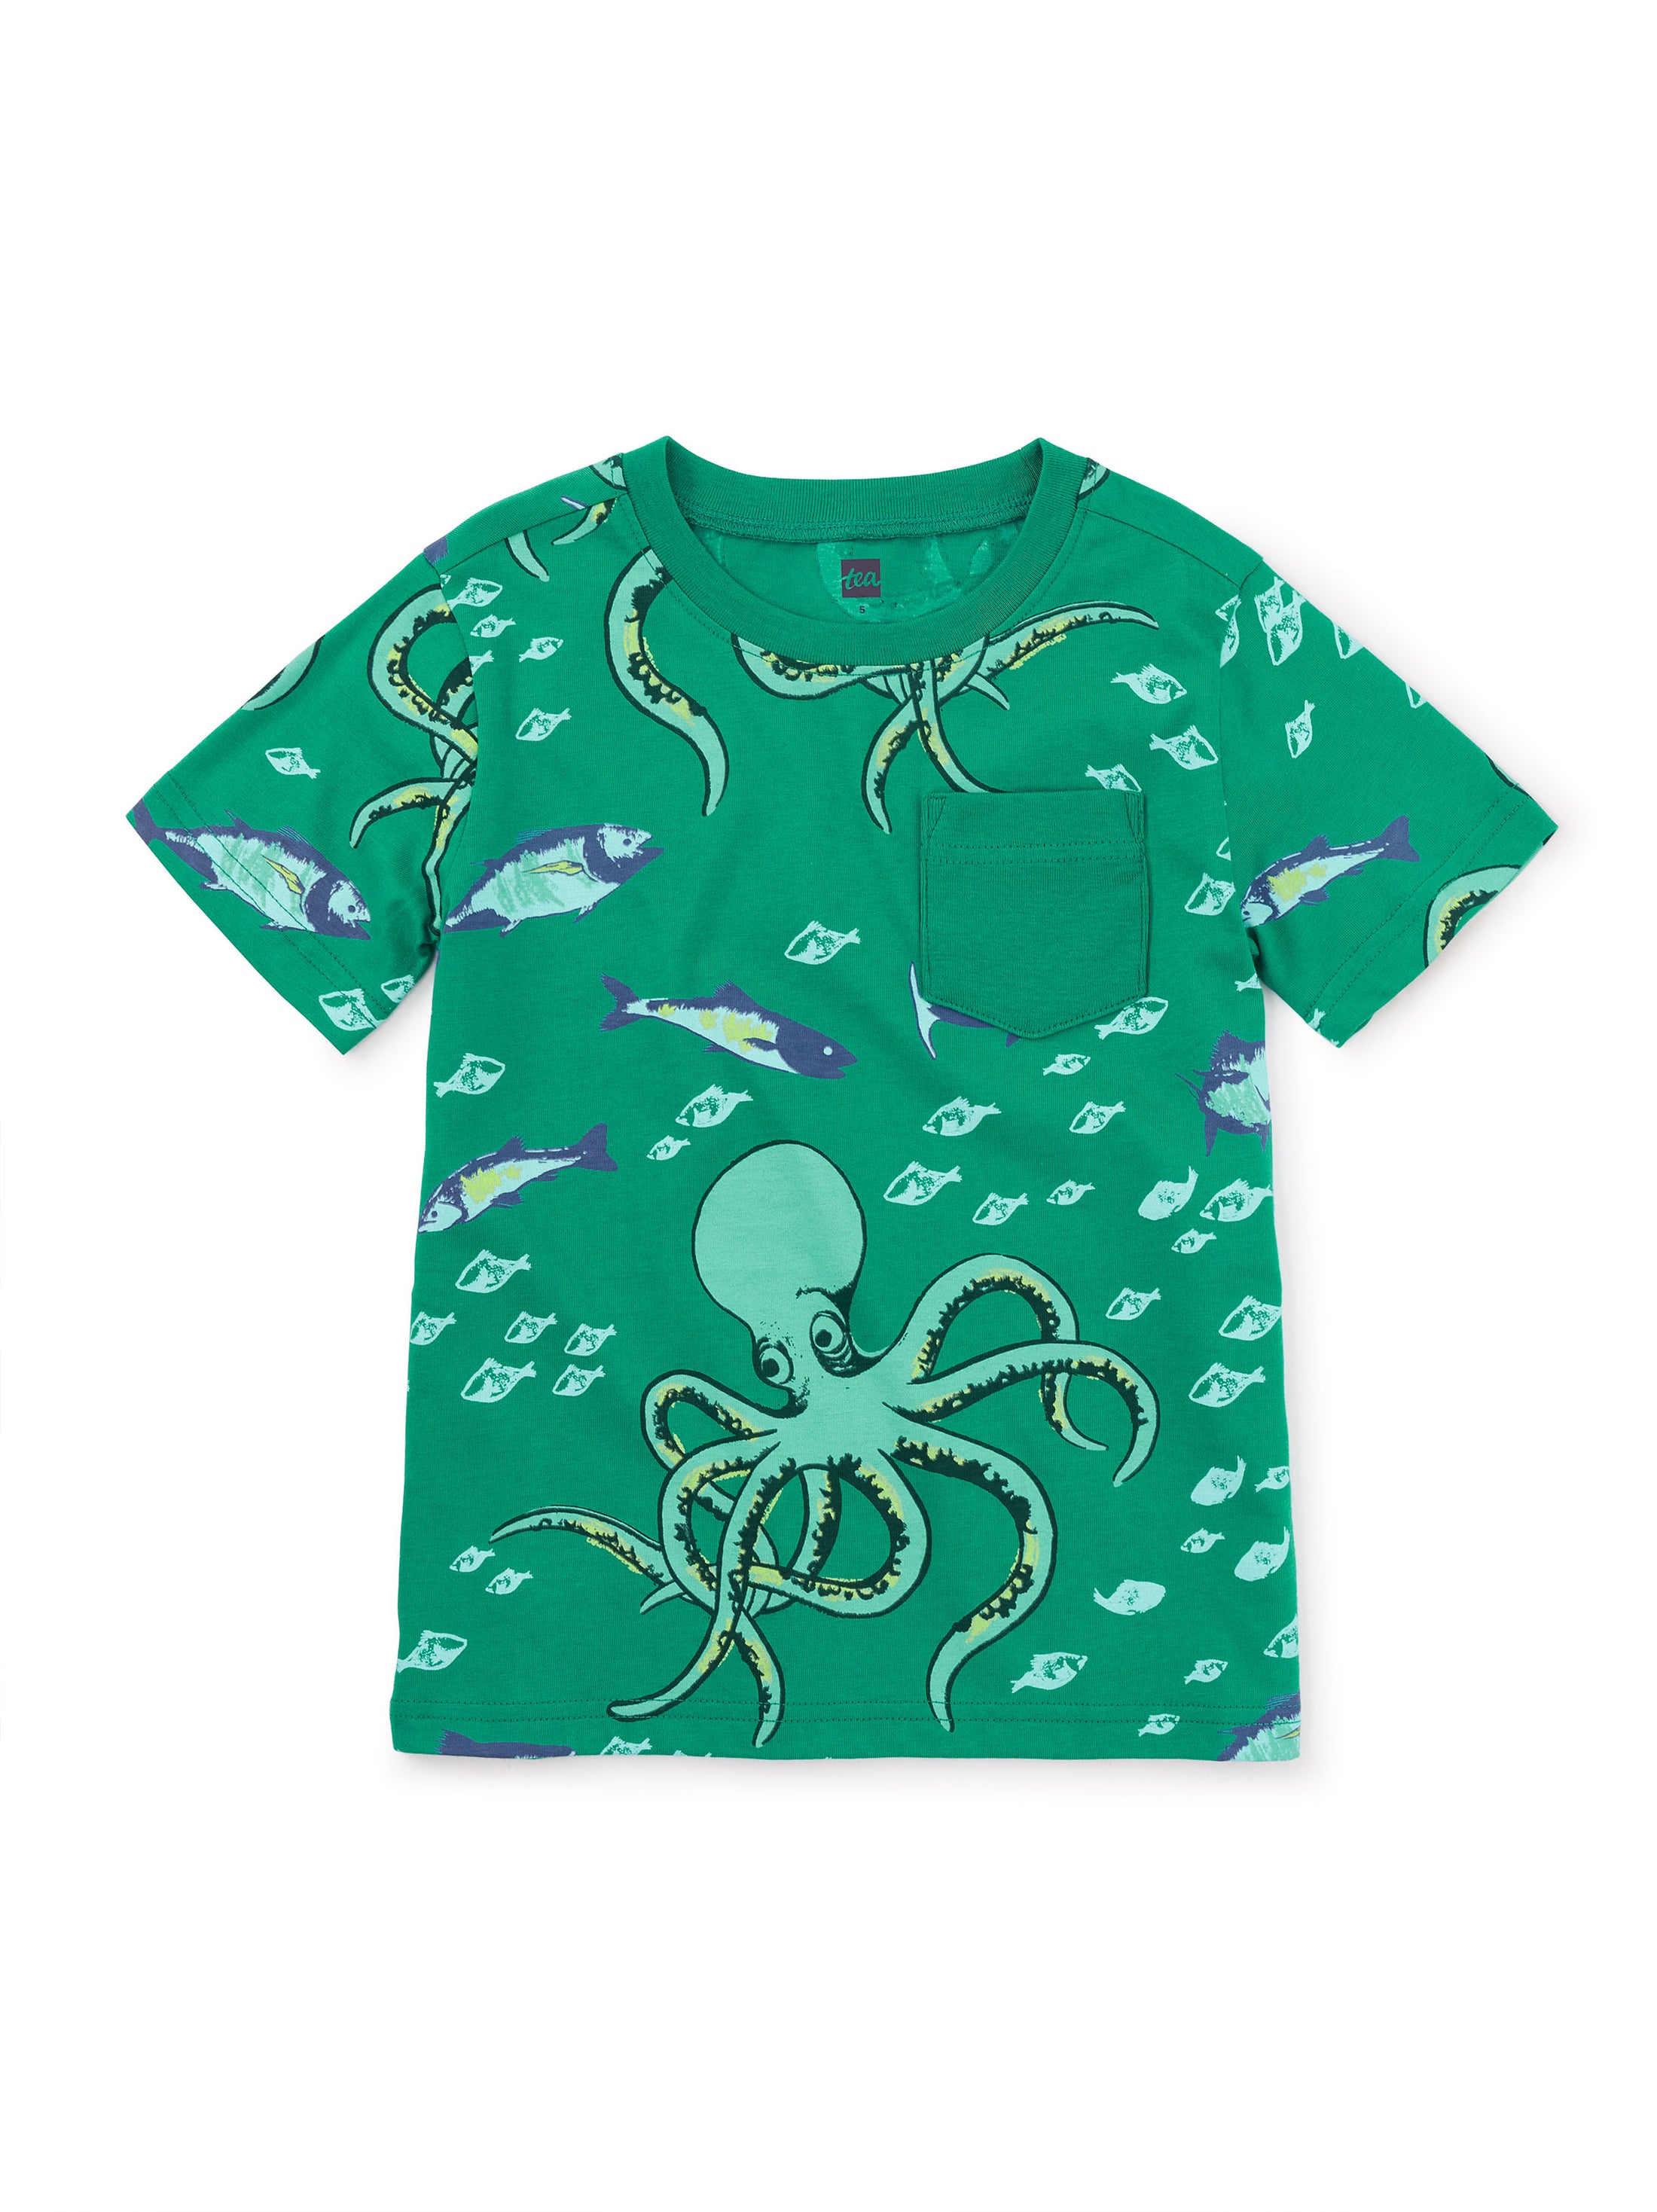 Octopus Chase Pocket Tee